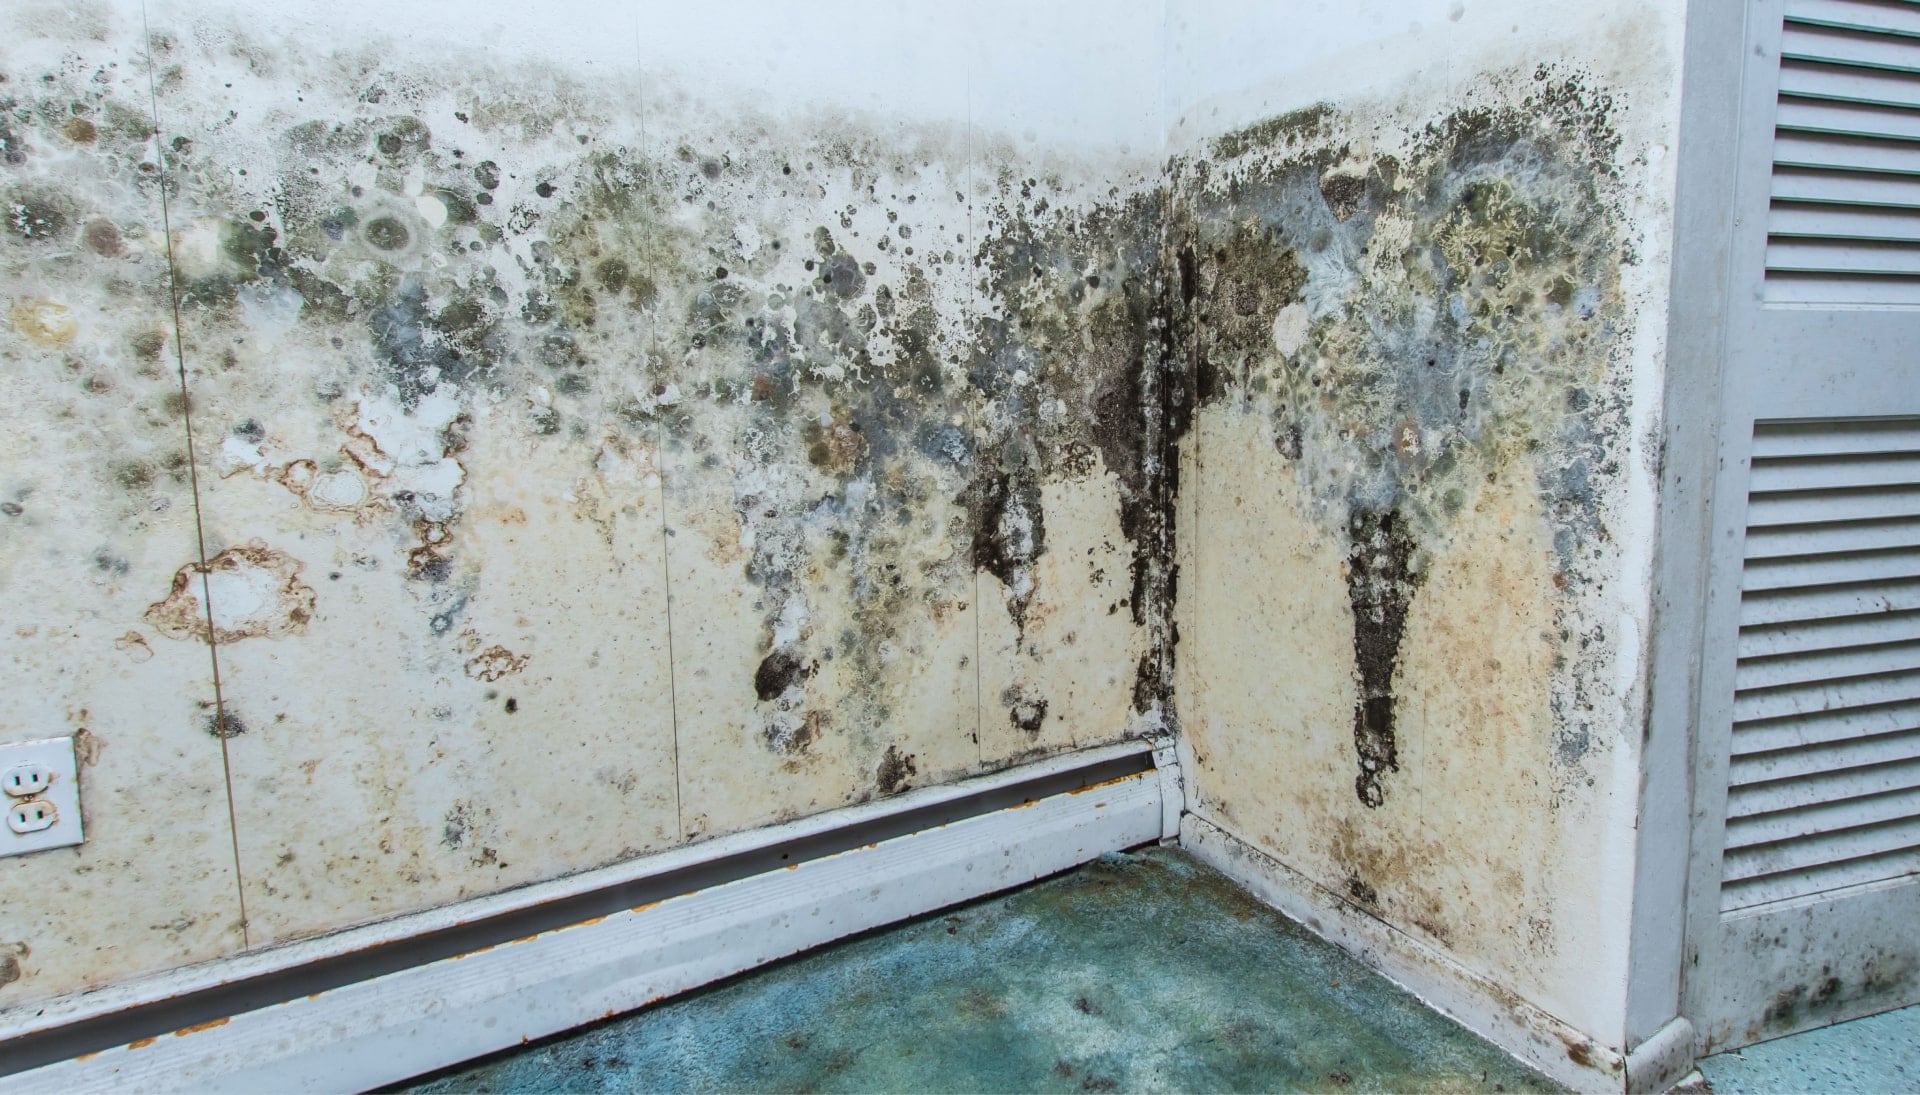 A mold remediation team using specialized techniques to remove mold damage and control odors in a Plano property, with a focus on safety and efficiency